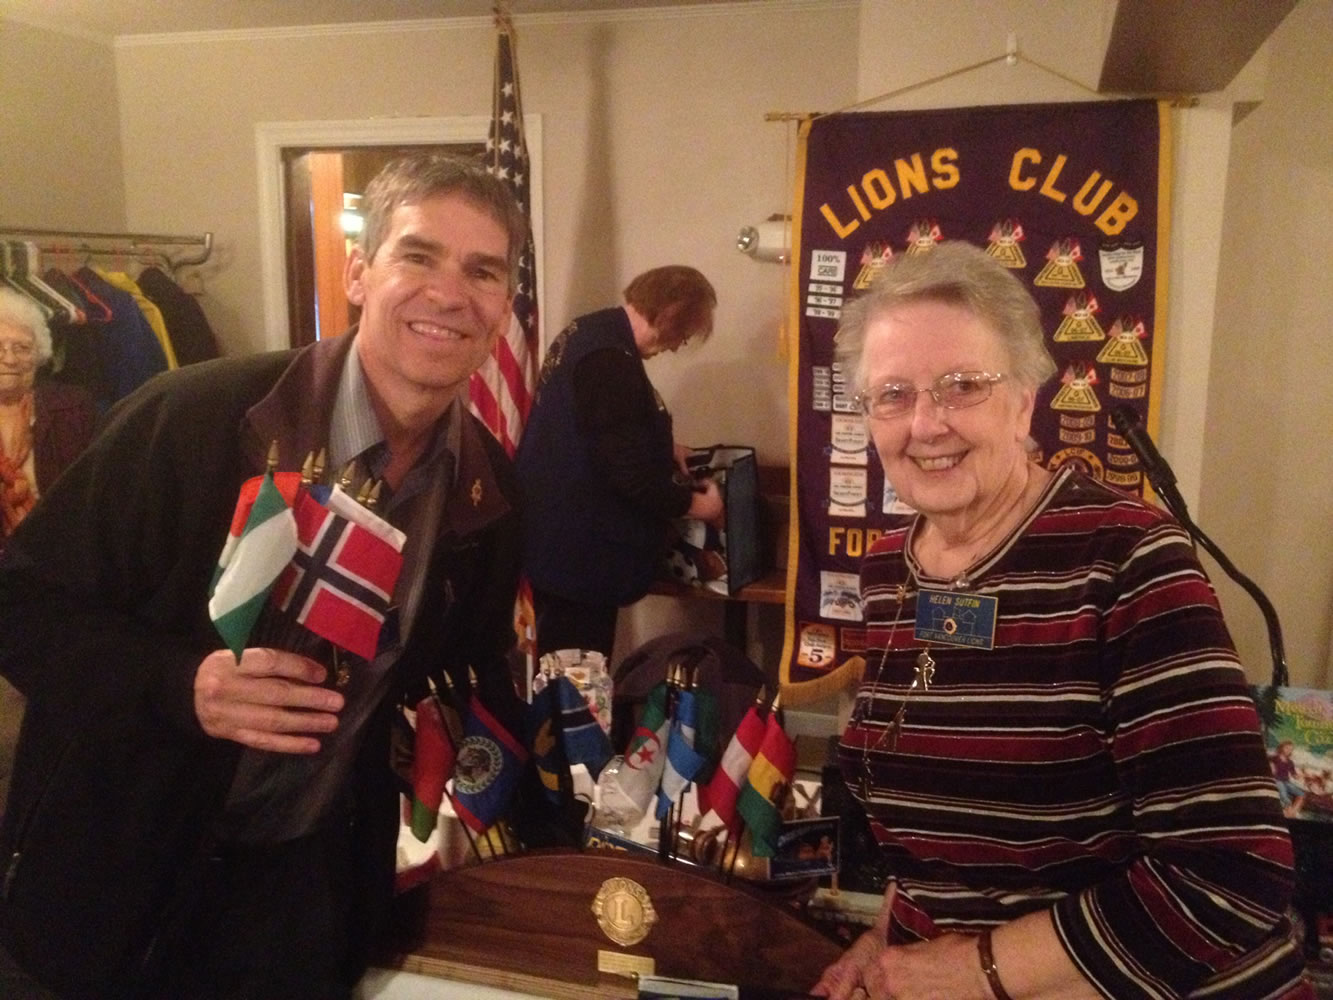 Rose Village: Fort Vancouver Lions club membership director Roy Pulliam and 2011 President Helen Sutfin helped guide the organization's membership growth in 2011 and 2012, which won the club an international honor.